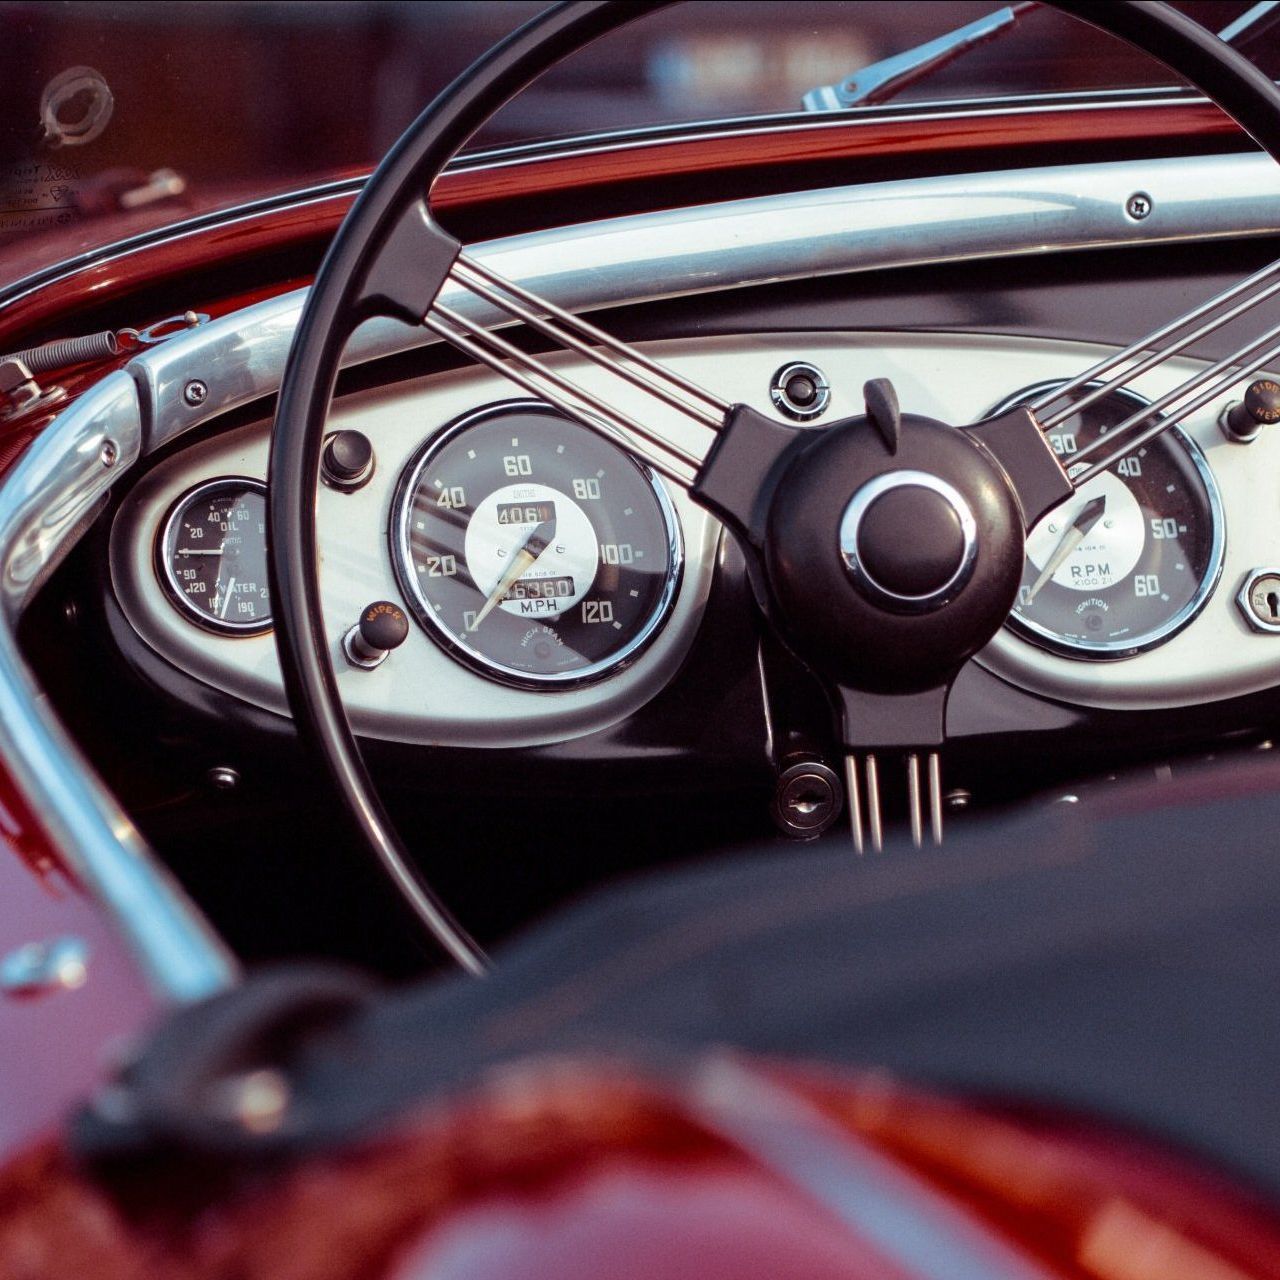 Timeless elegance: Classic car interior perfection at its finest.